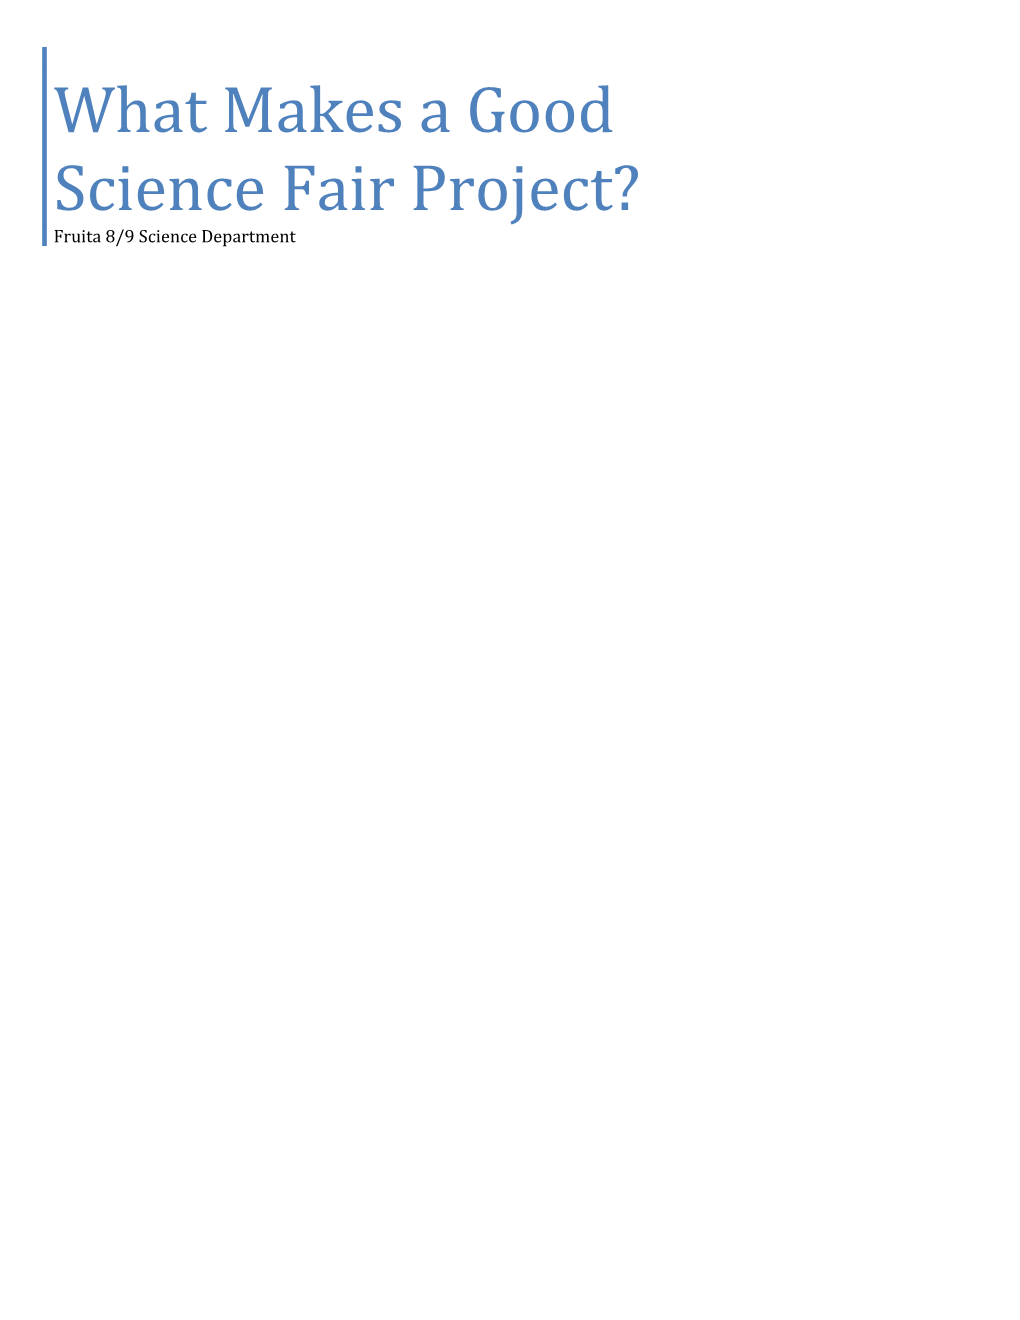 What Makes a Good Science Fair Project?